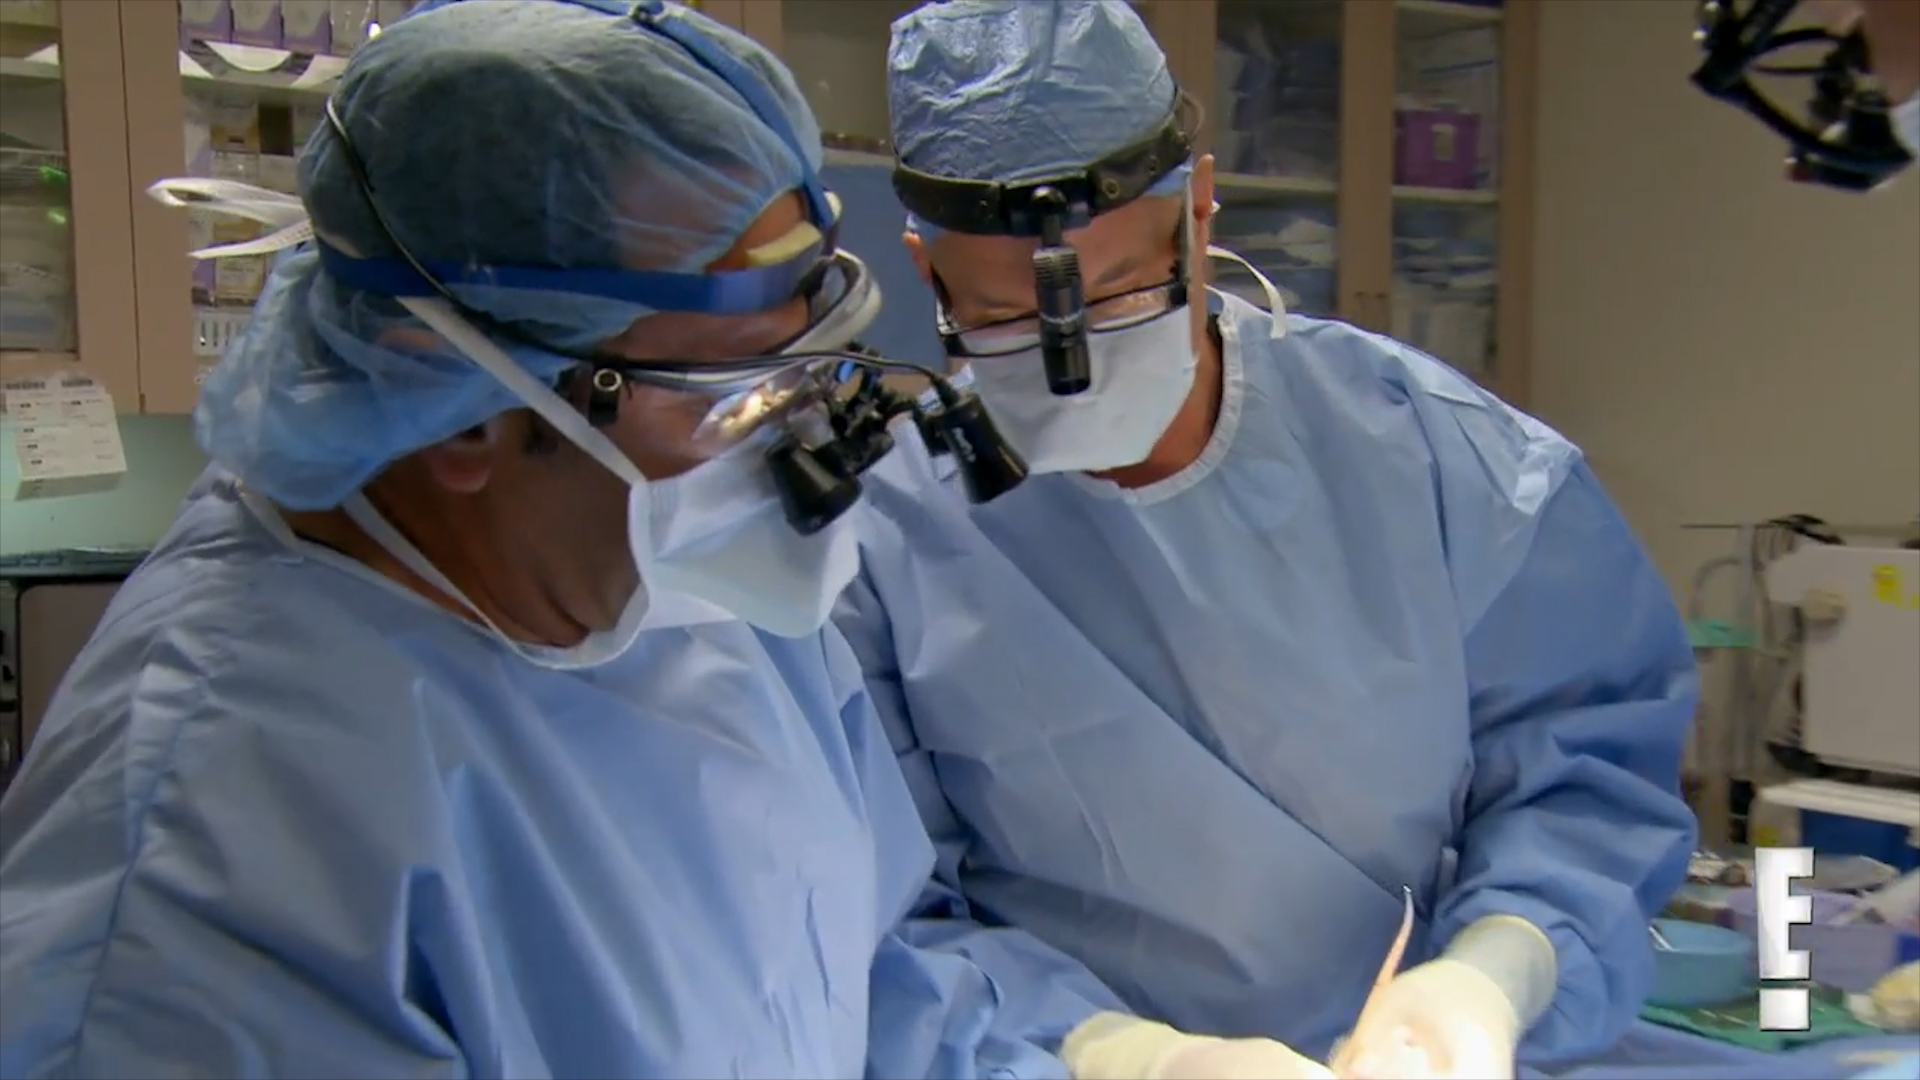 Reality Show "Botched" Handing out Misinformation to